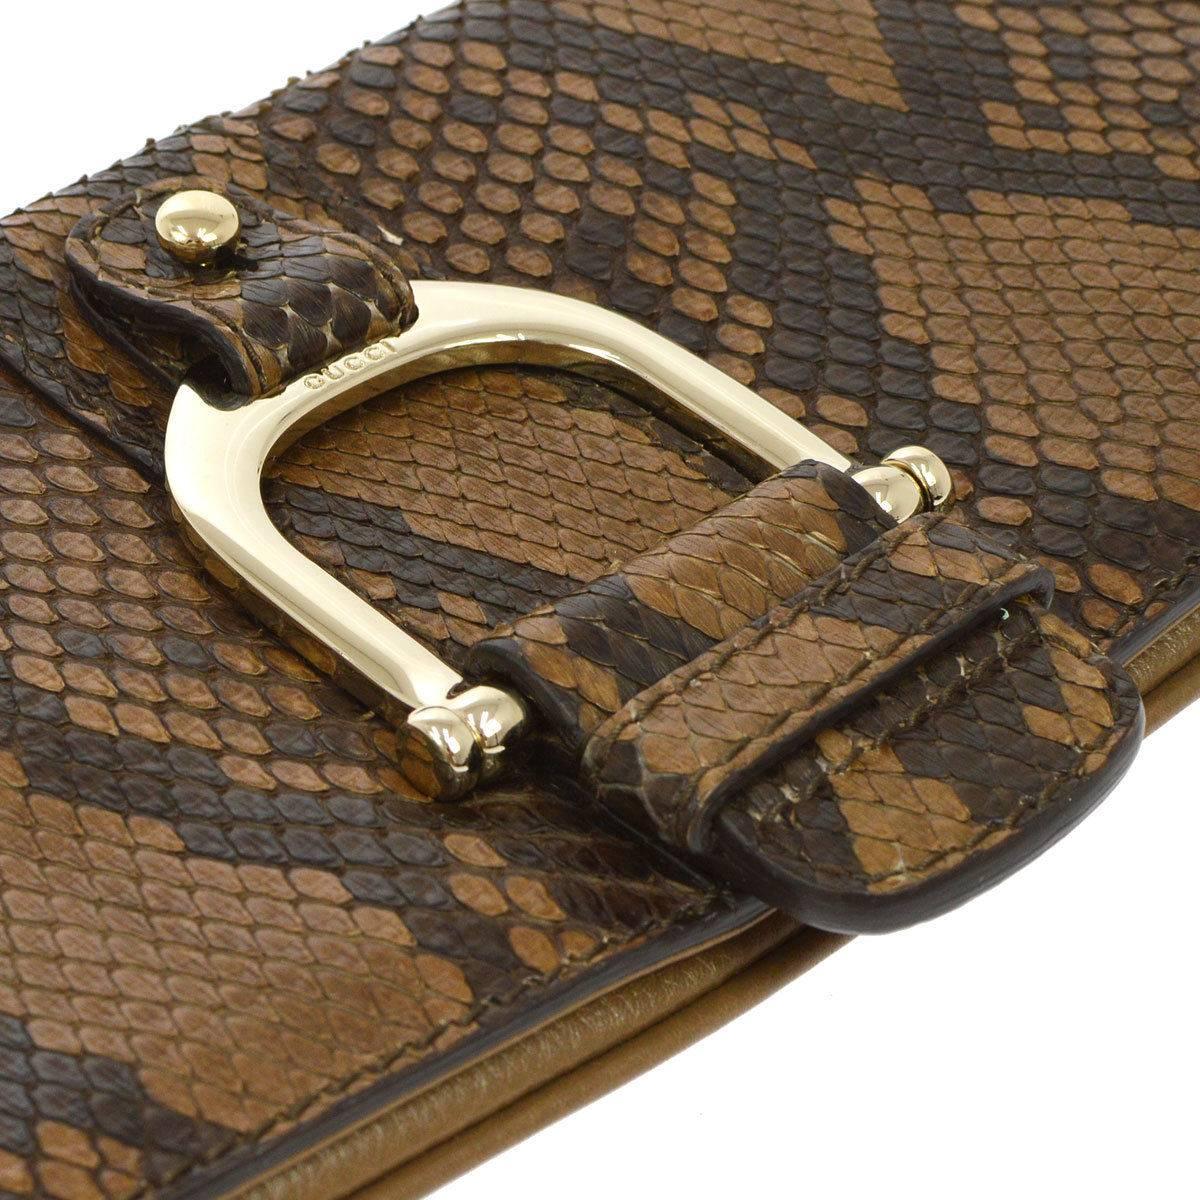 Gucci Cognac Taupe Black Snakeskin Leather Gold Horsebit Evening Clutch Bag  

Snakeskin
Leather
Gold tone hardware
Magnetic closure
Twill lining 
Made in Italy
Measures 12